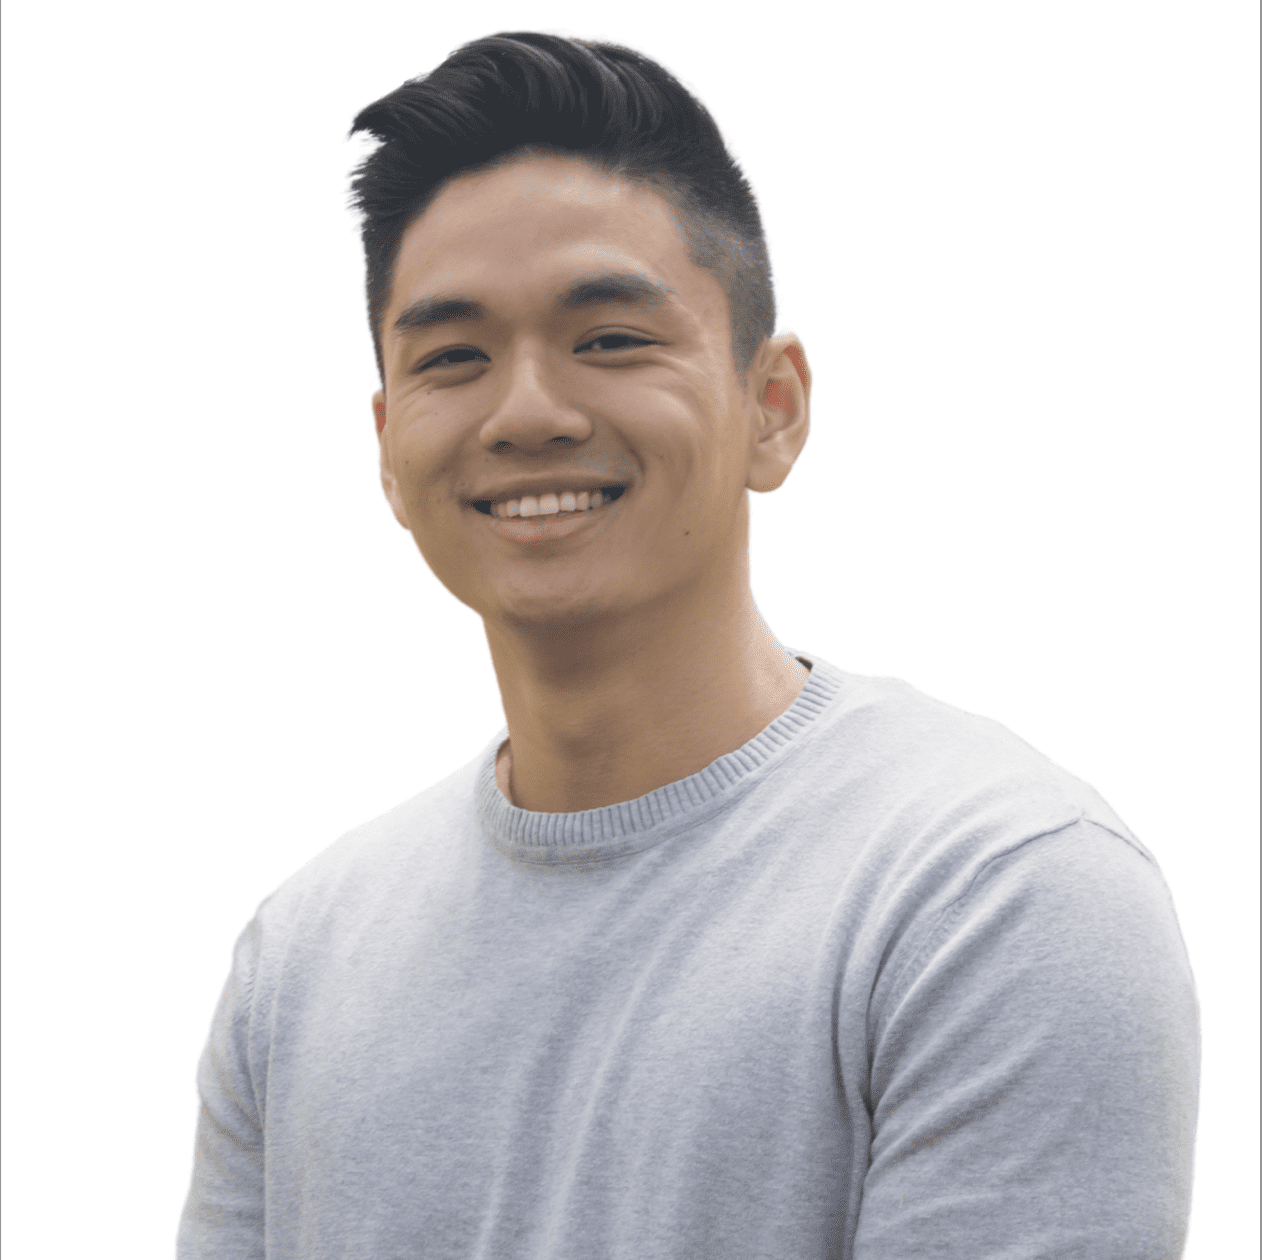 A young Asian man, Alan Vu, smiling and wearing a light gray sweater with a stylish haircut, against a white background.